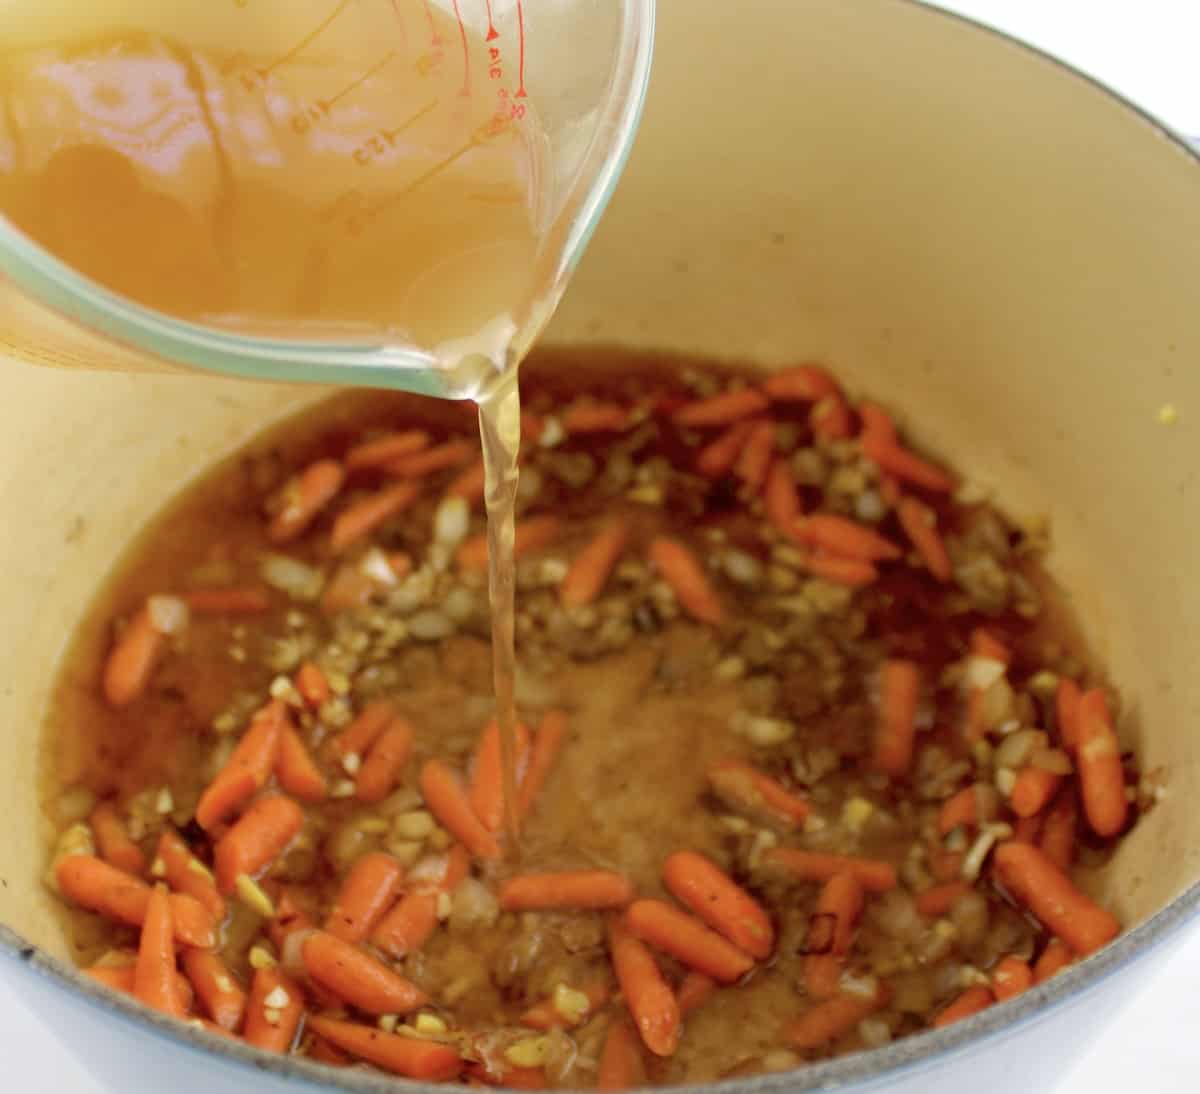 chicken broth being poured into pot with carrots and onions